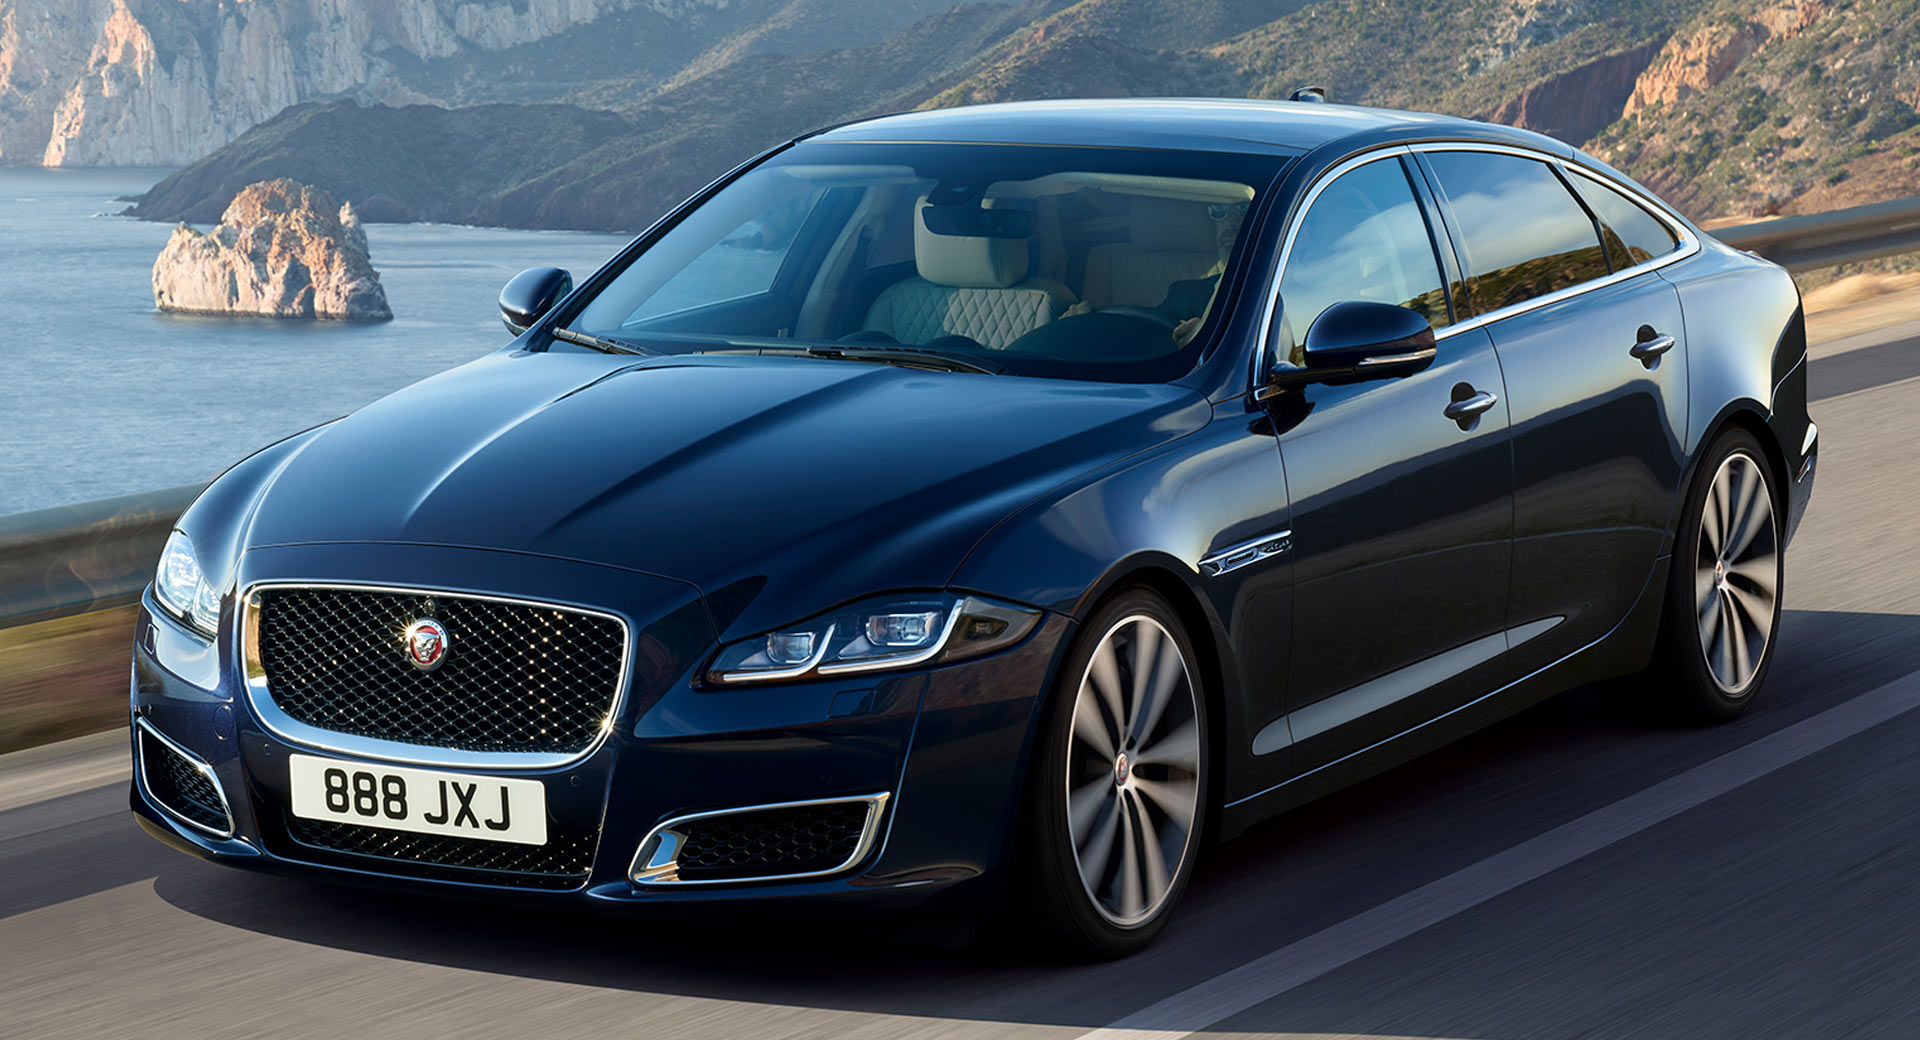 The Next Jaguar XJ Is Going To Be "Something People Wanna Get Into And